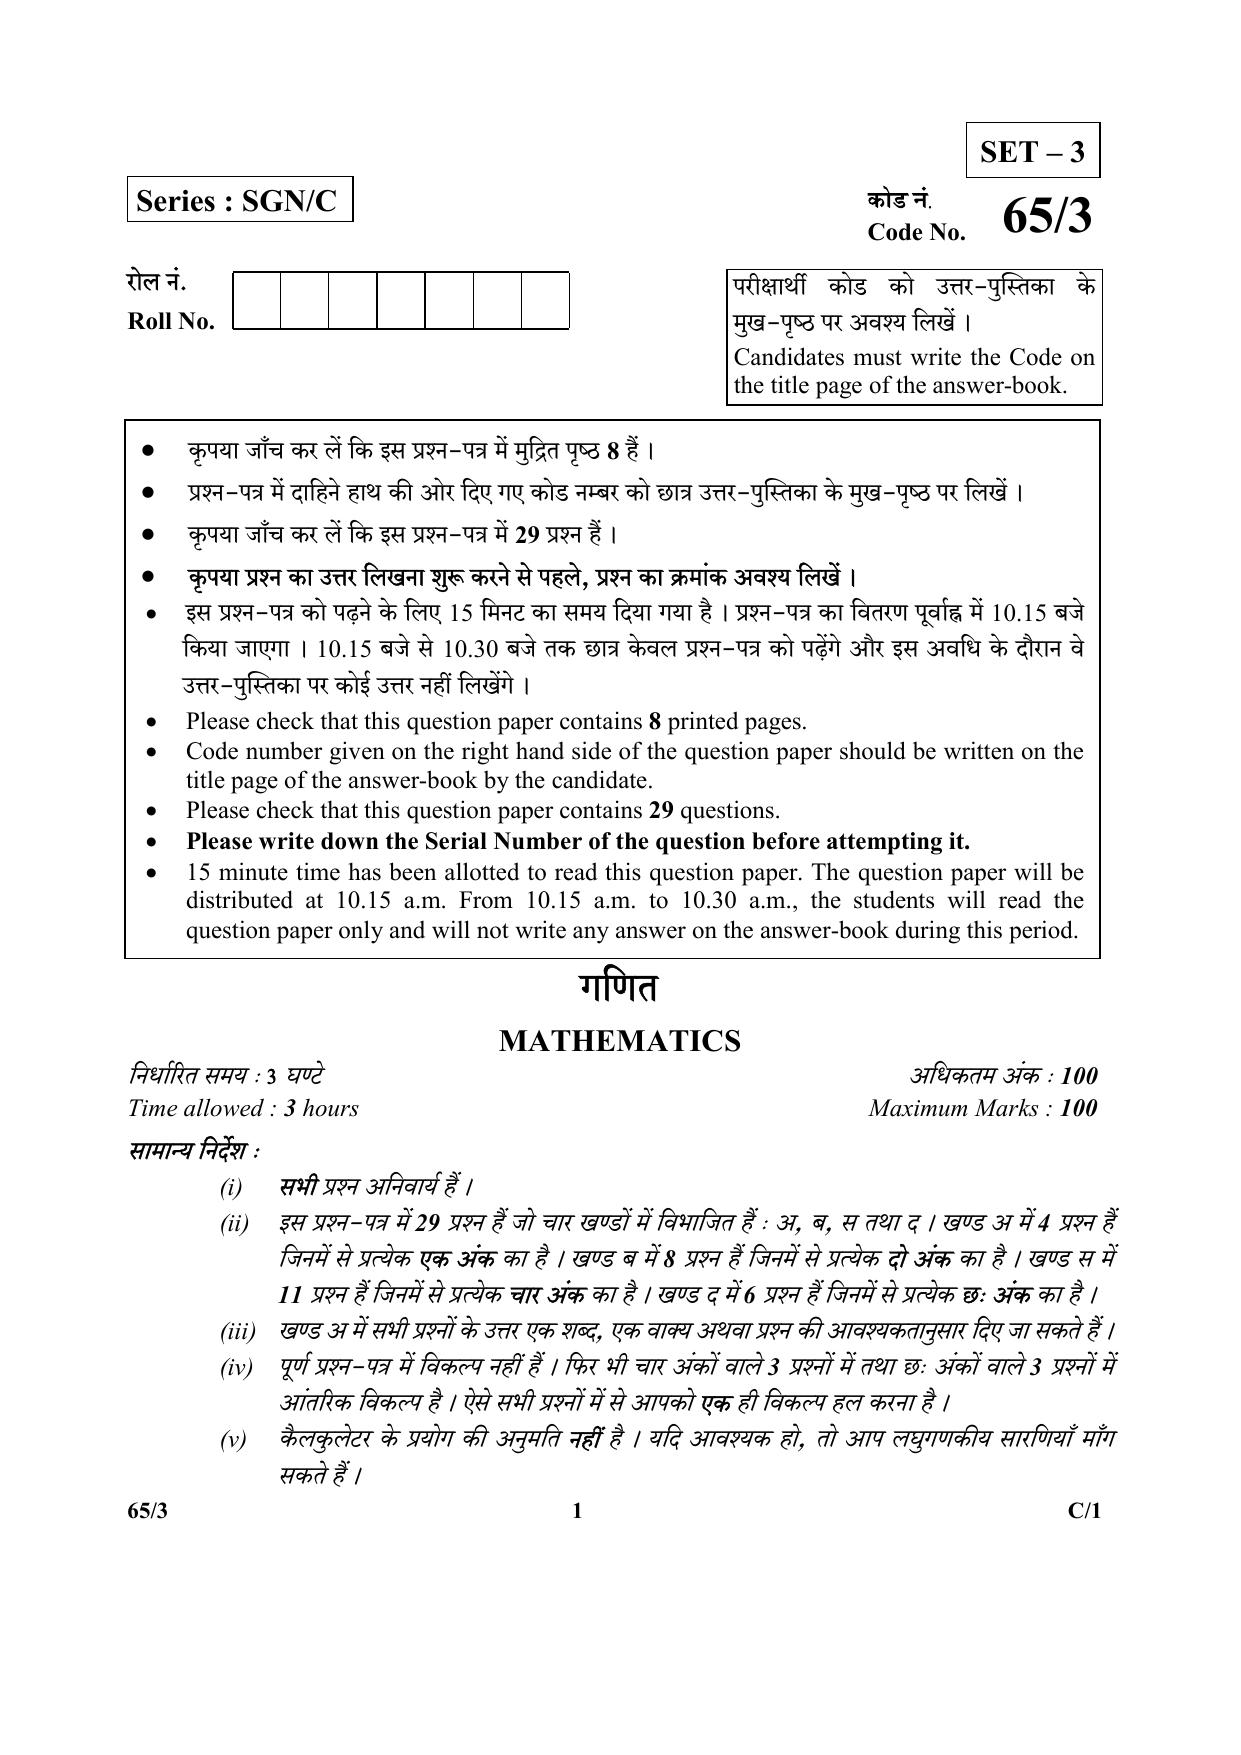 CBSE Class 12 65-3 (Mathematics) 2018 Compartment Question Paper - Page 1